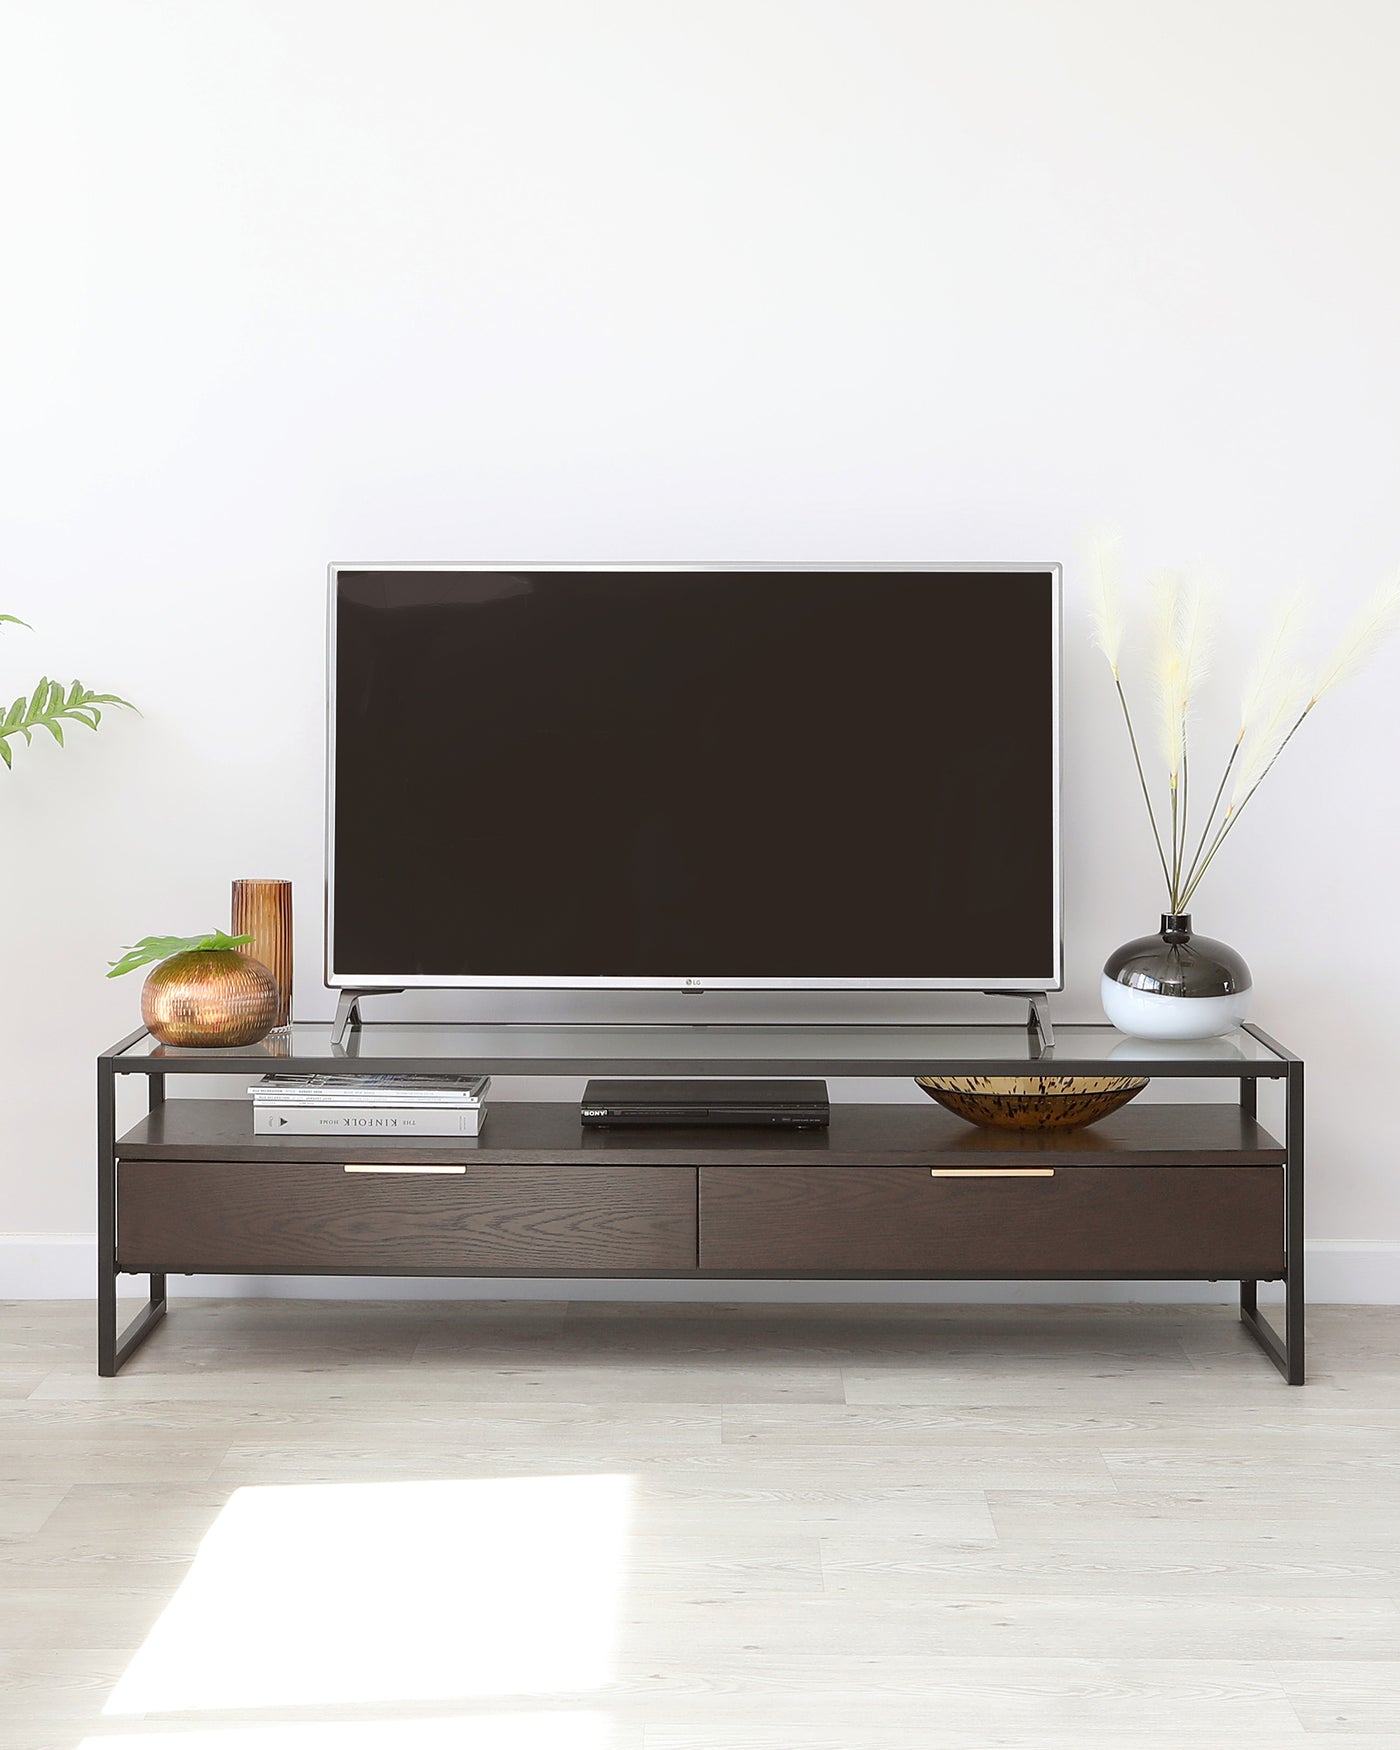 Modern minimalist TV stand with a dark wood finish and metal frame, featuring two drawers and an open shelf for storage, displayed in a bright room with decorative items.